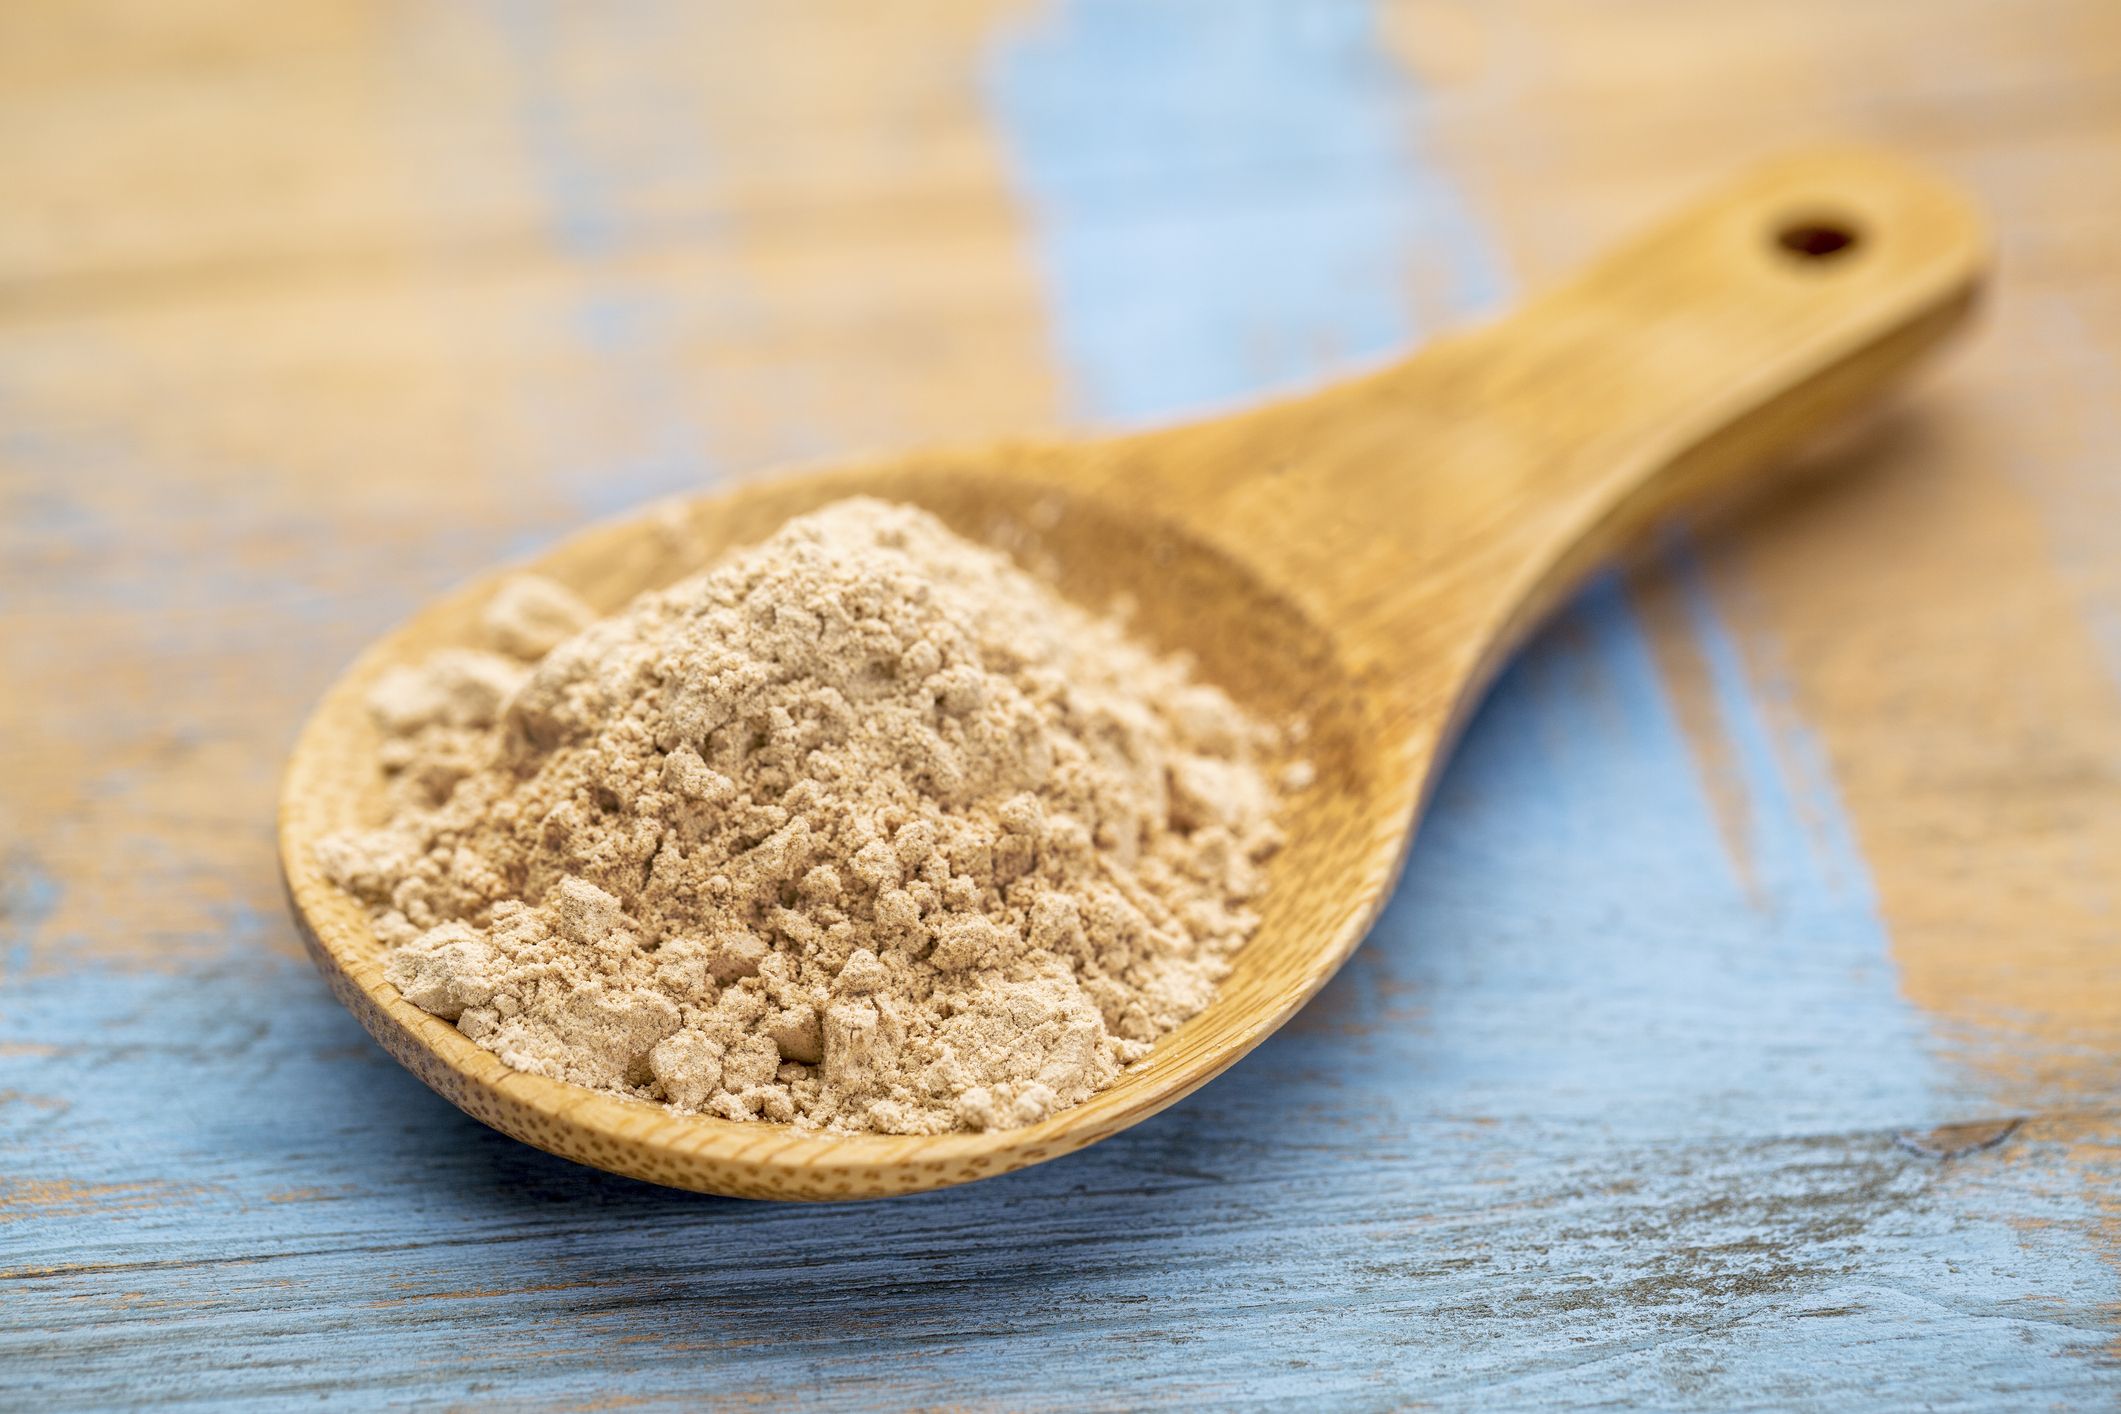 How to eat Maca? Understand the correct way to eat Maca in 3 minutes ...